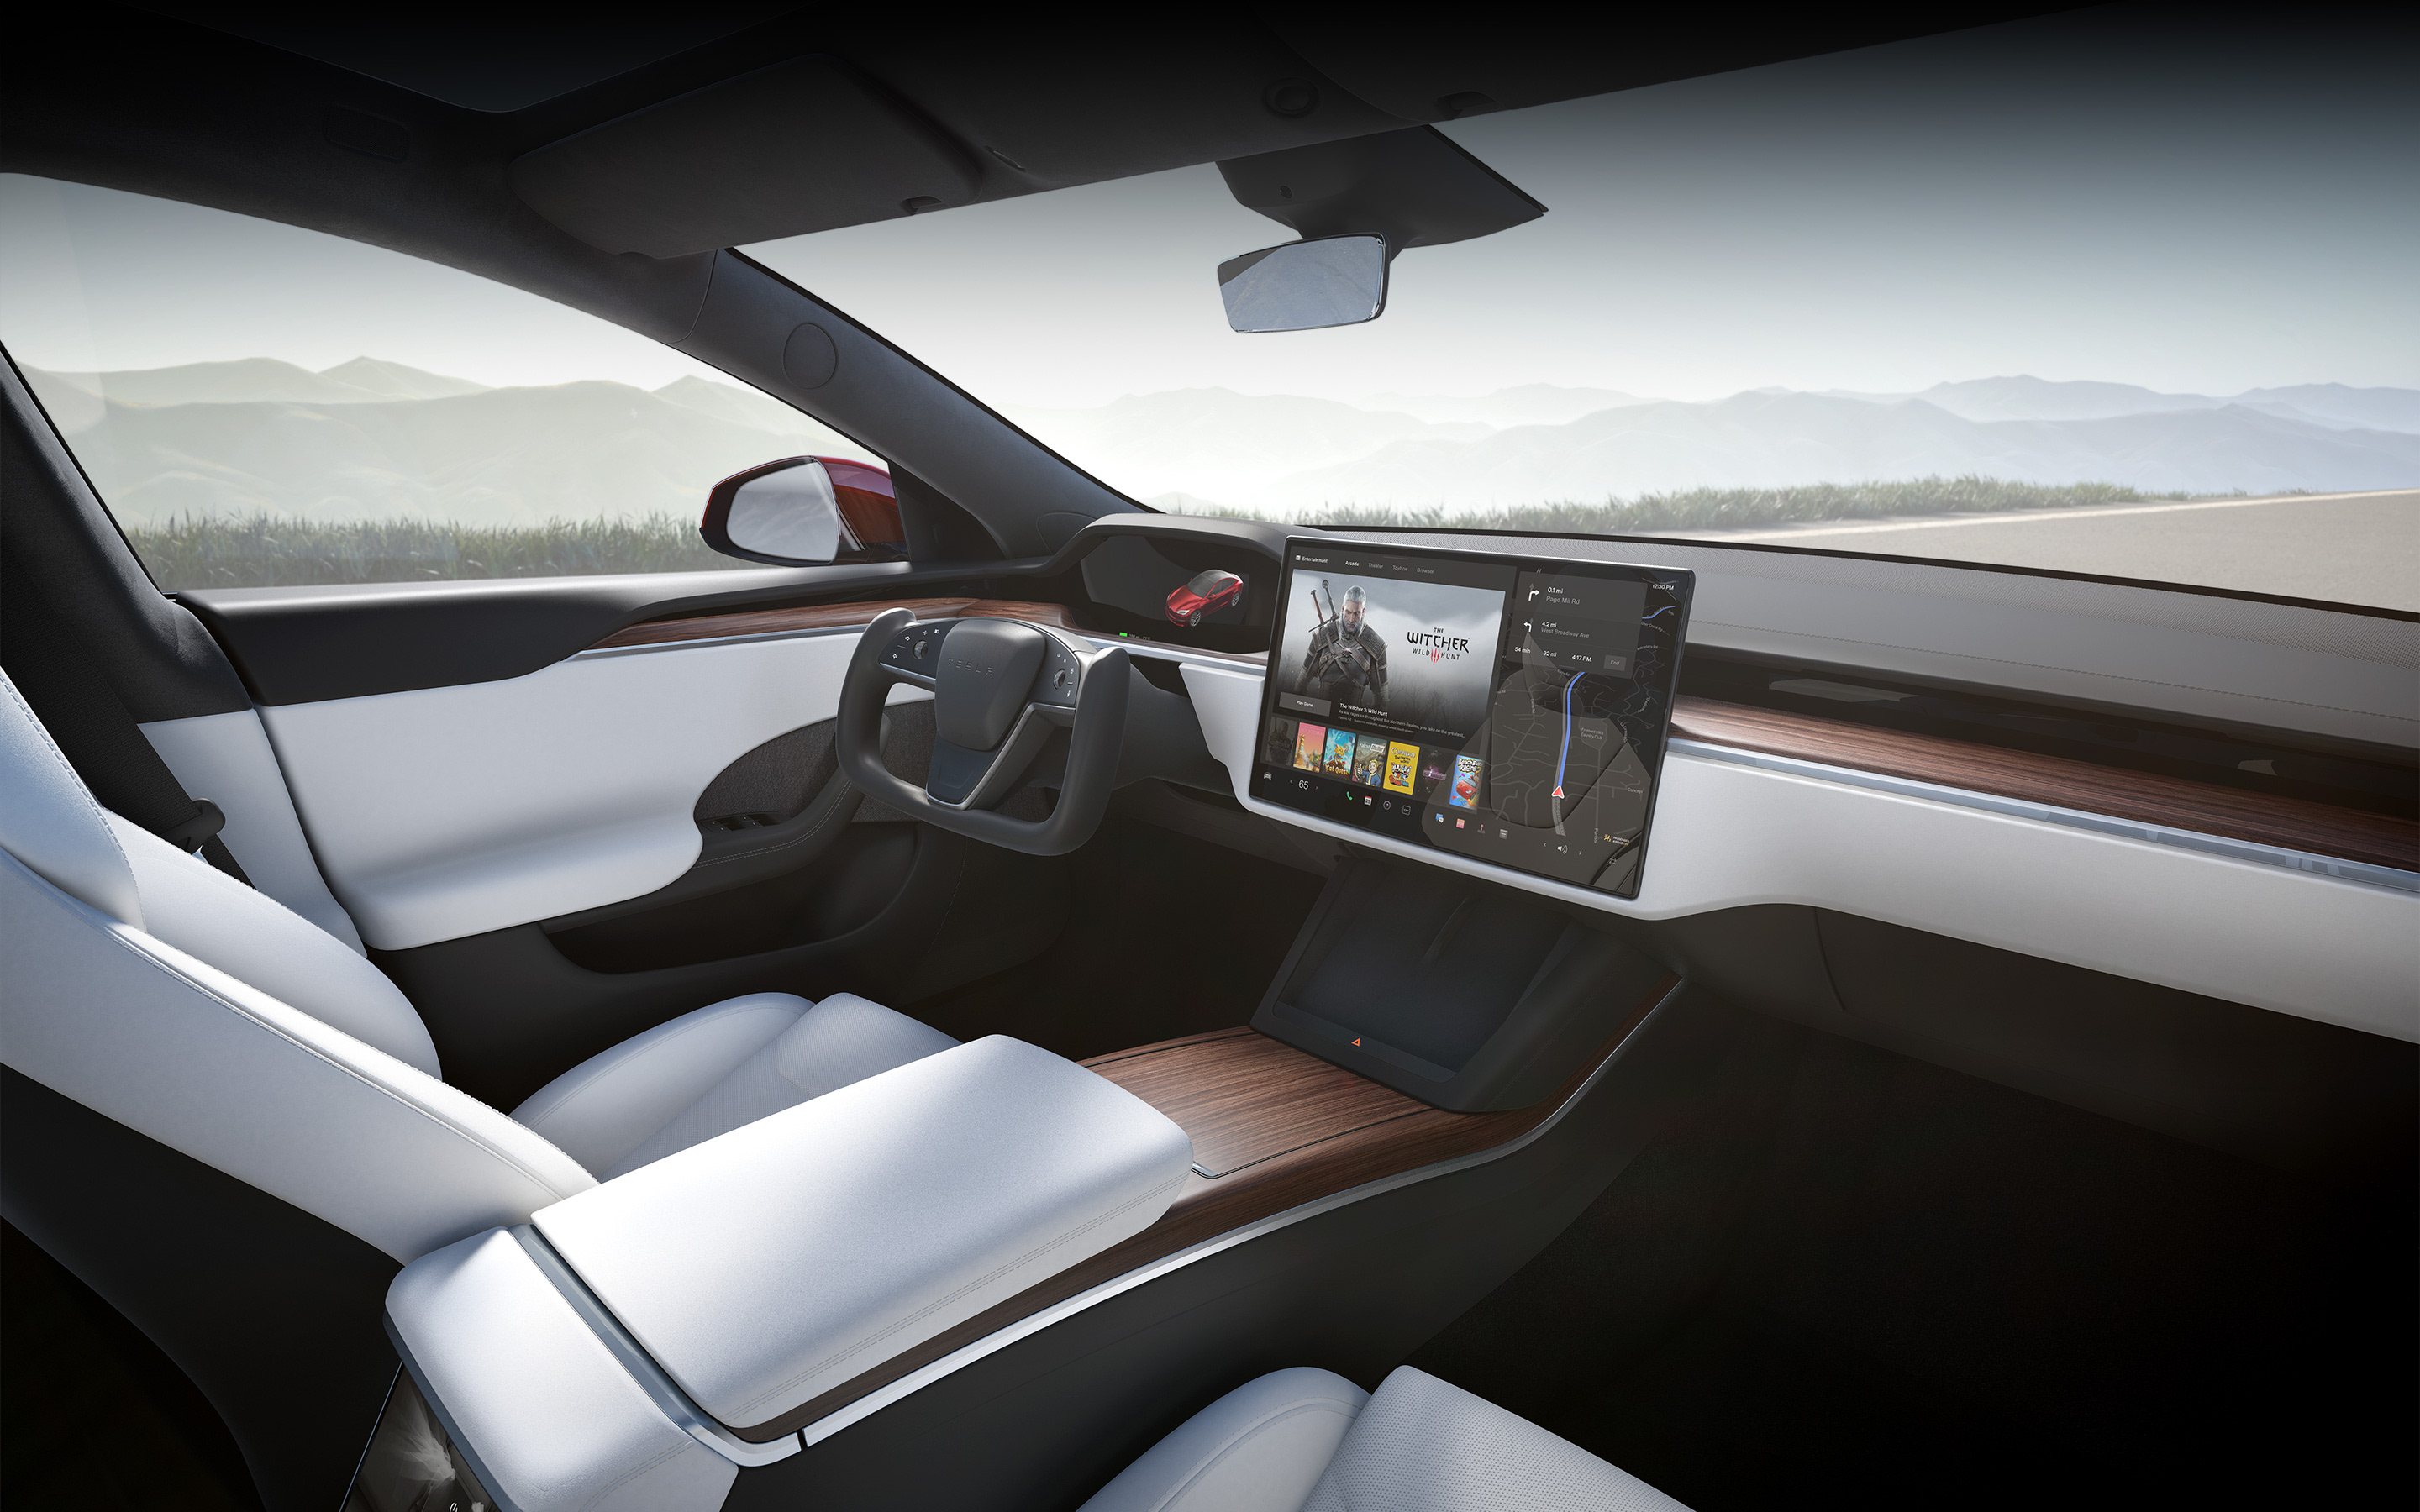 Model S with white interior from the passenger seat point of view with focus on the infotainment touchscreen